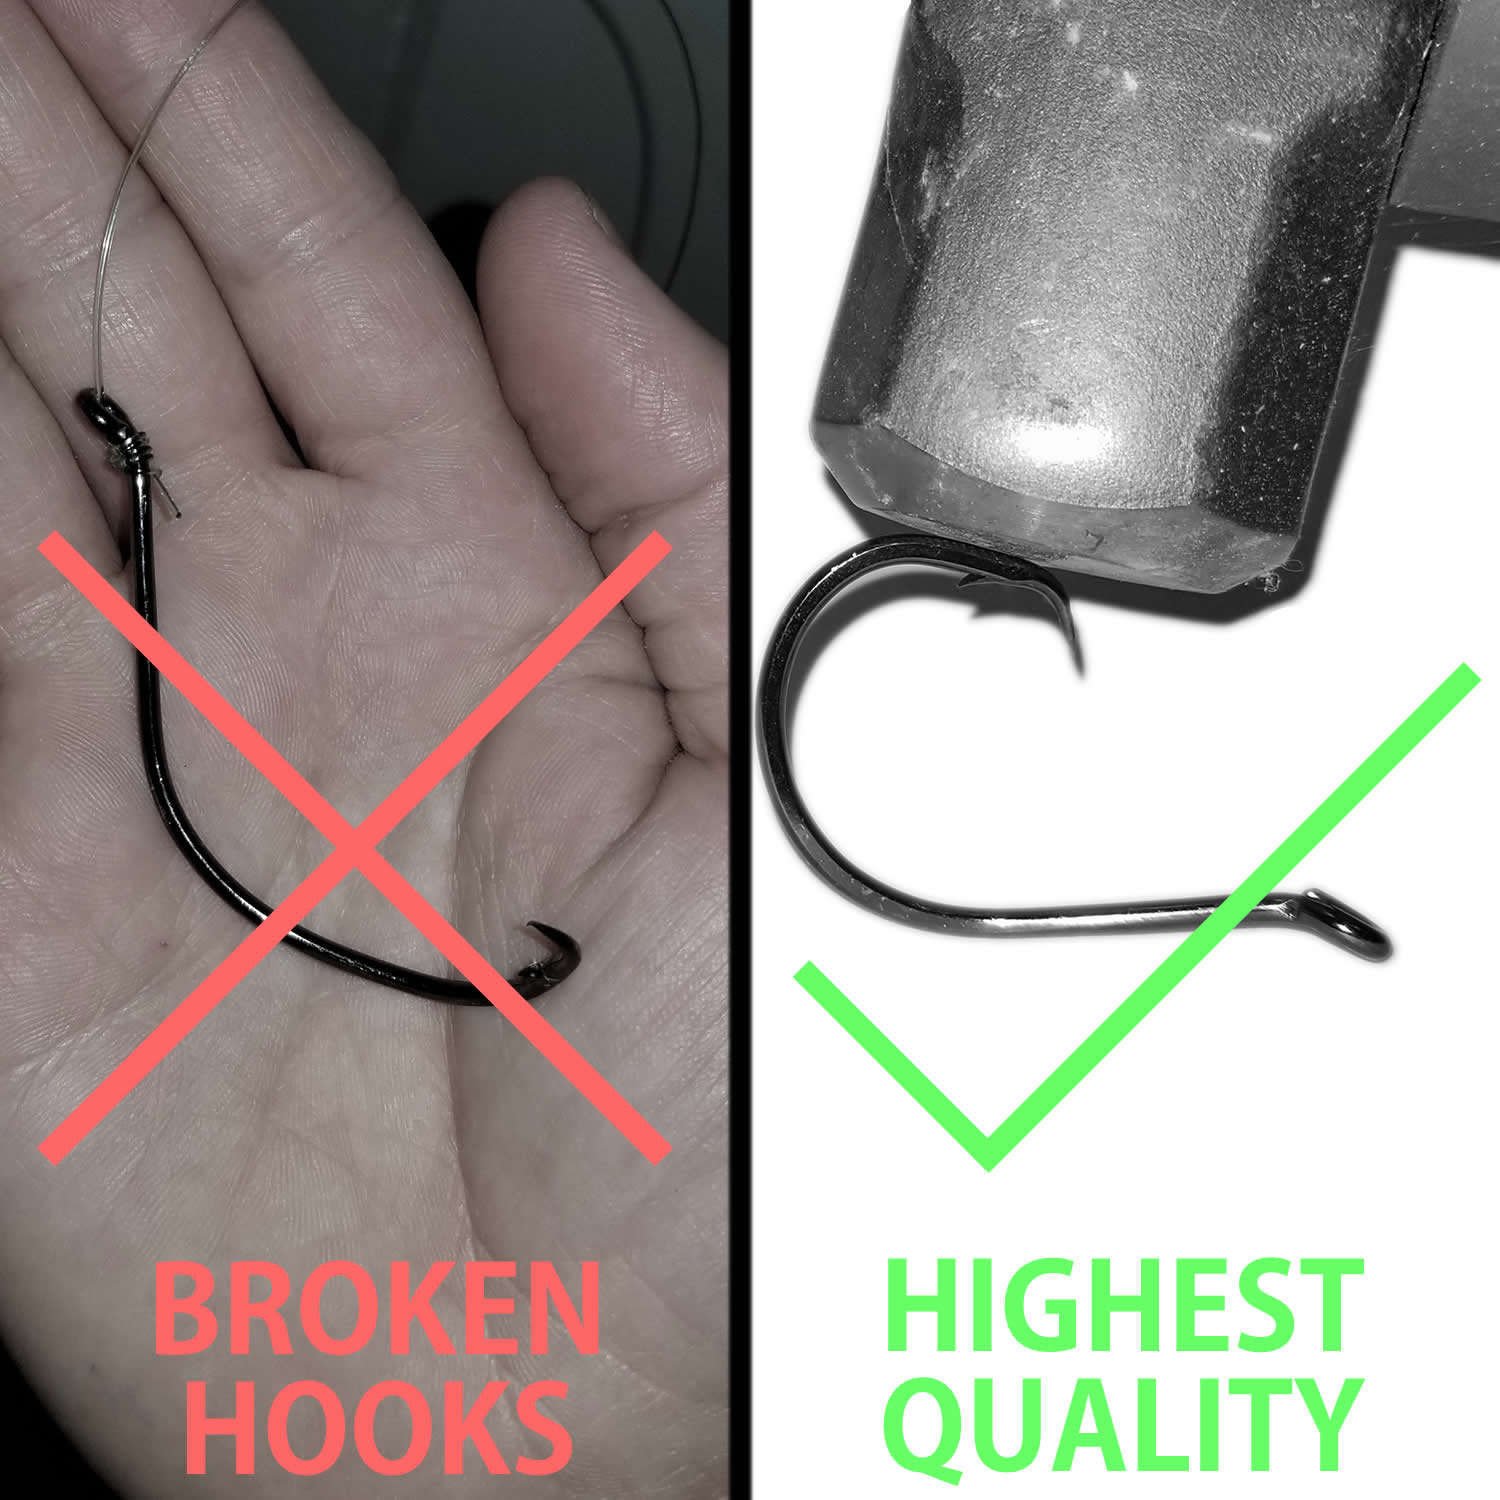 Should I try these Catfish hooks for a more successful fishing experience?  : r/catfishing